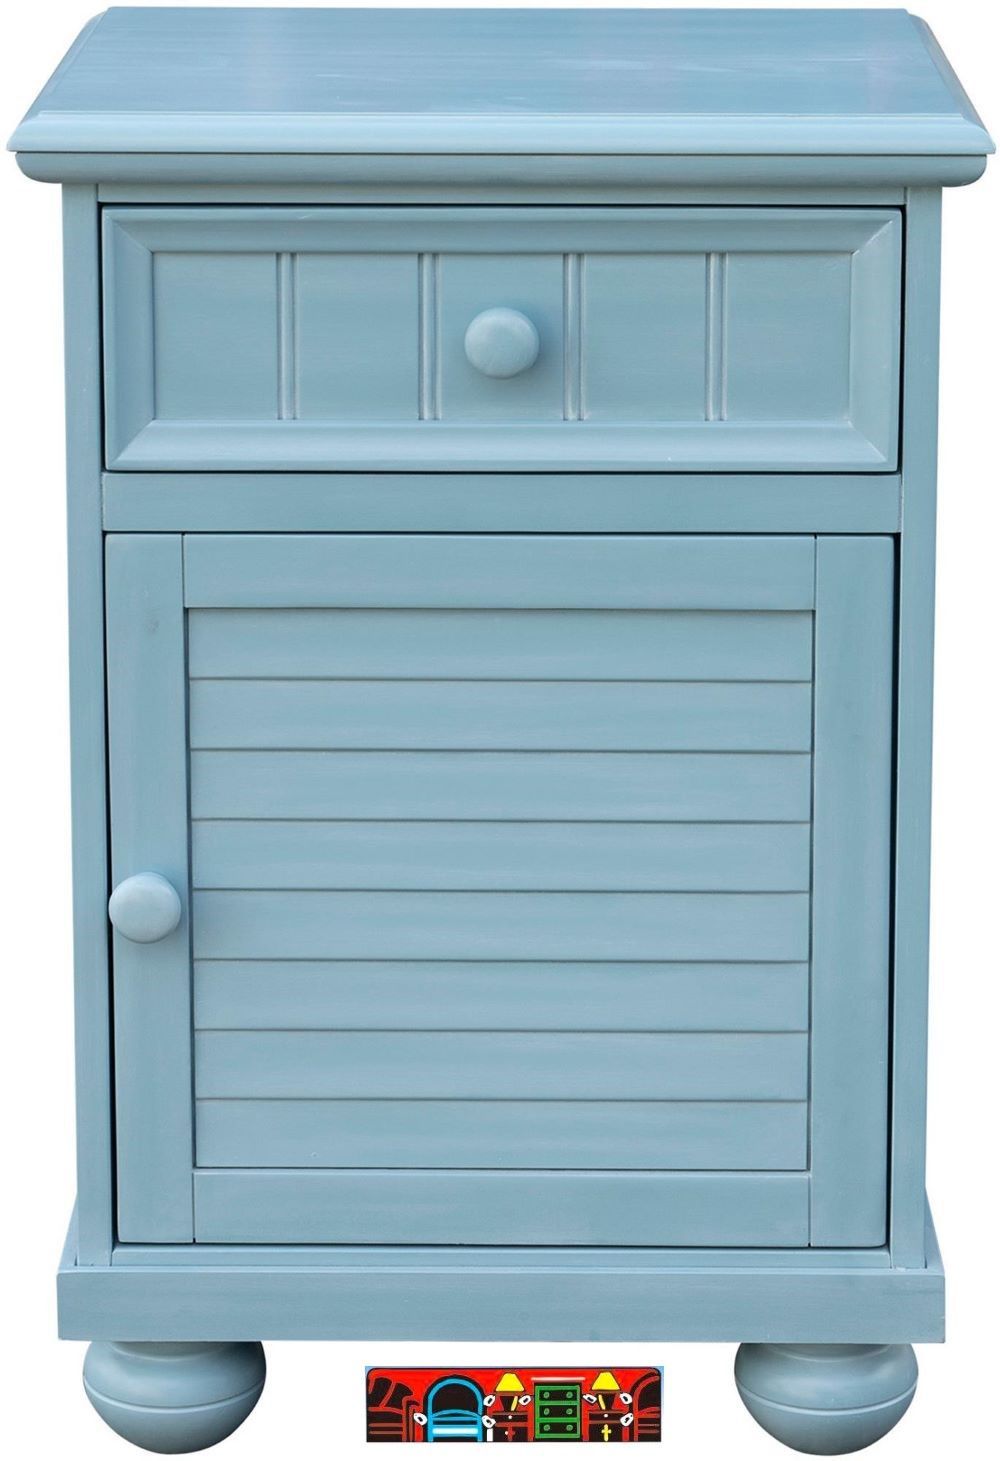 The Beachfront Door Nightstand in Ocean Blue brings unique style with maximum beside storage to your bedroom. On top is a drawer with recessed front and beading, and the door below showcases hand-placed shutters adding to its cottage feel.